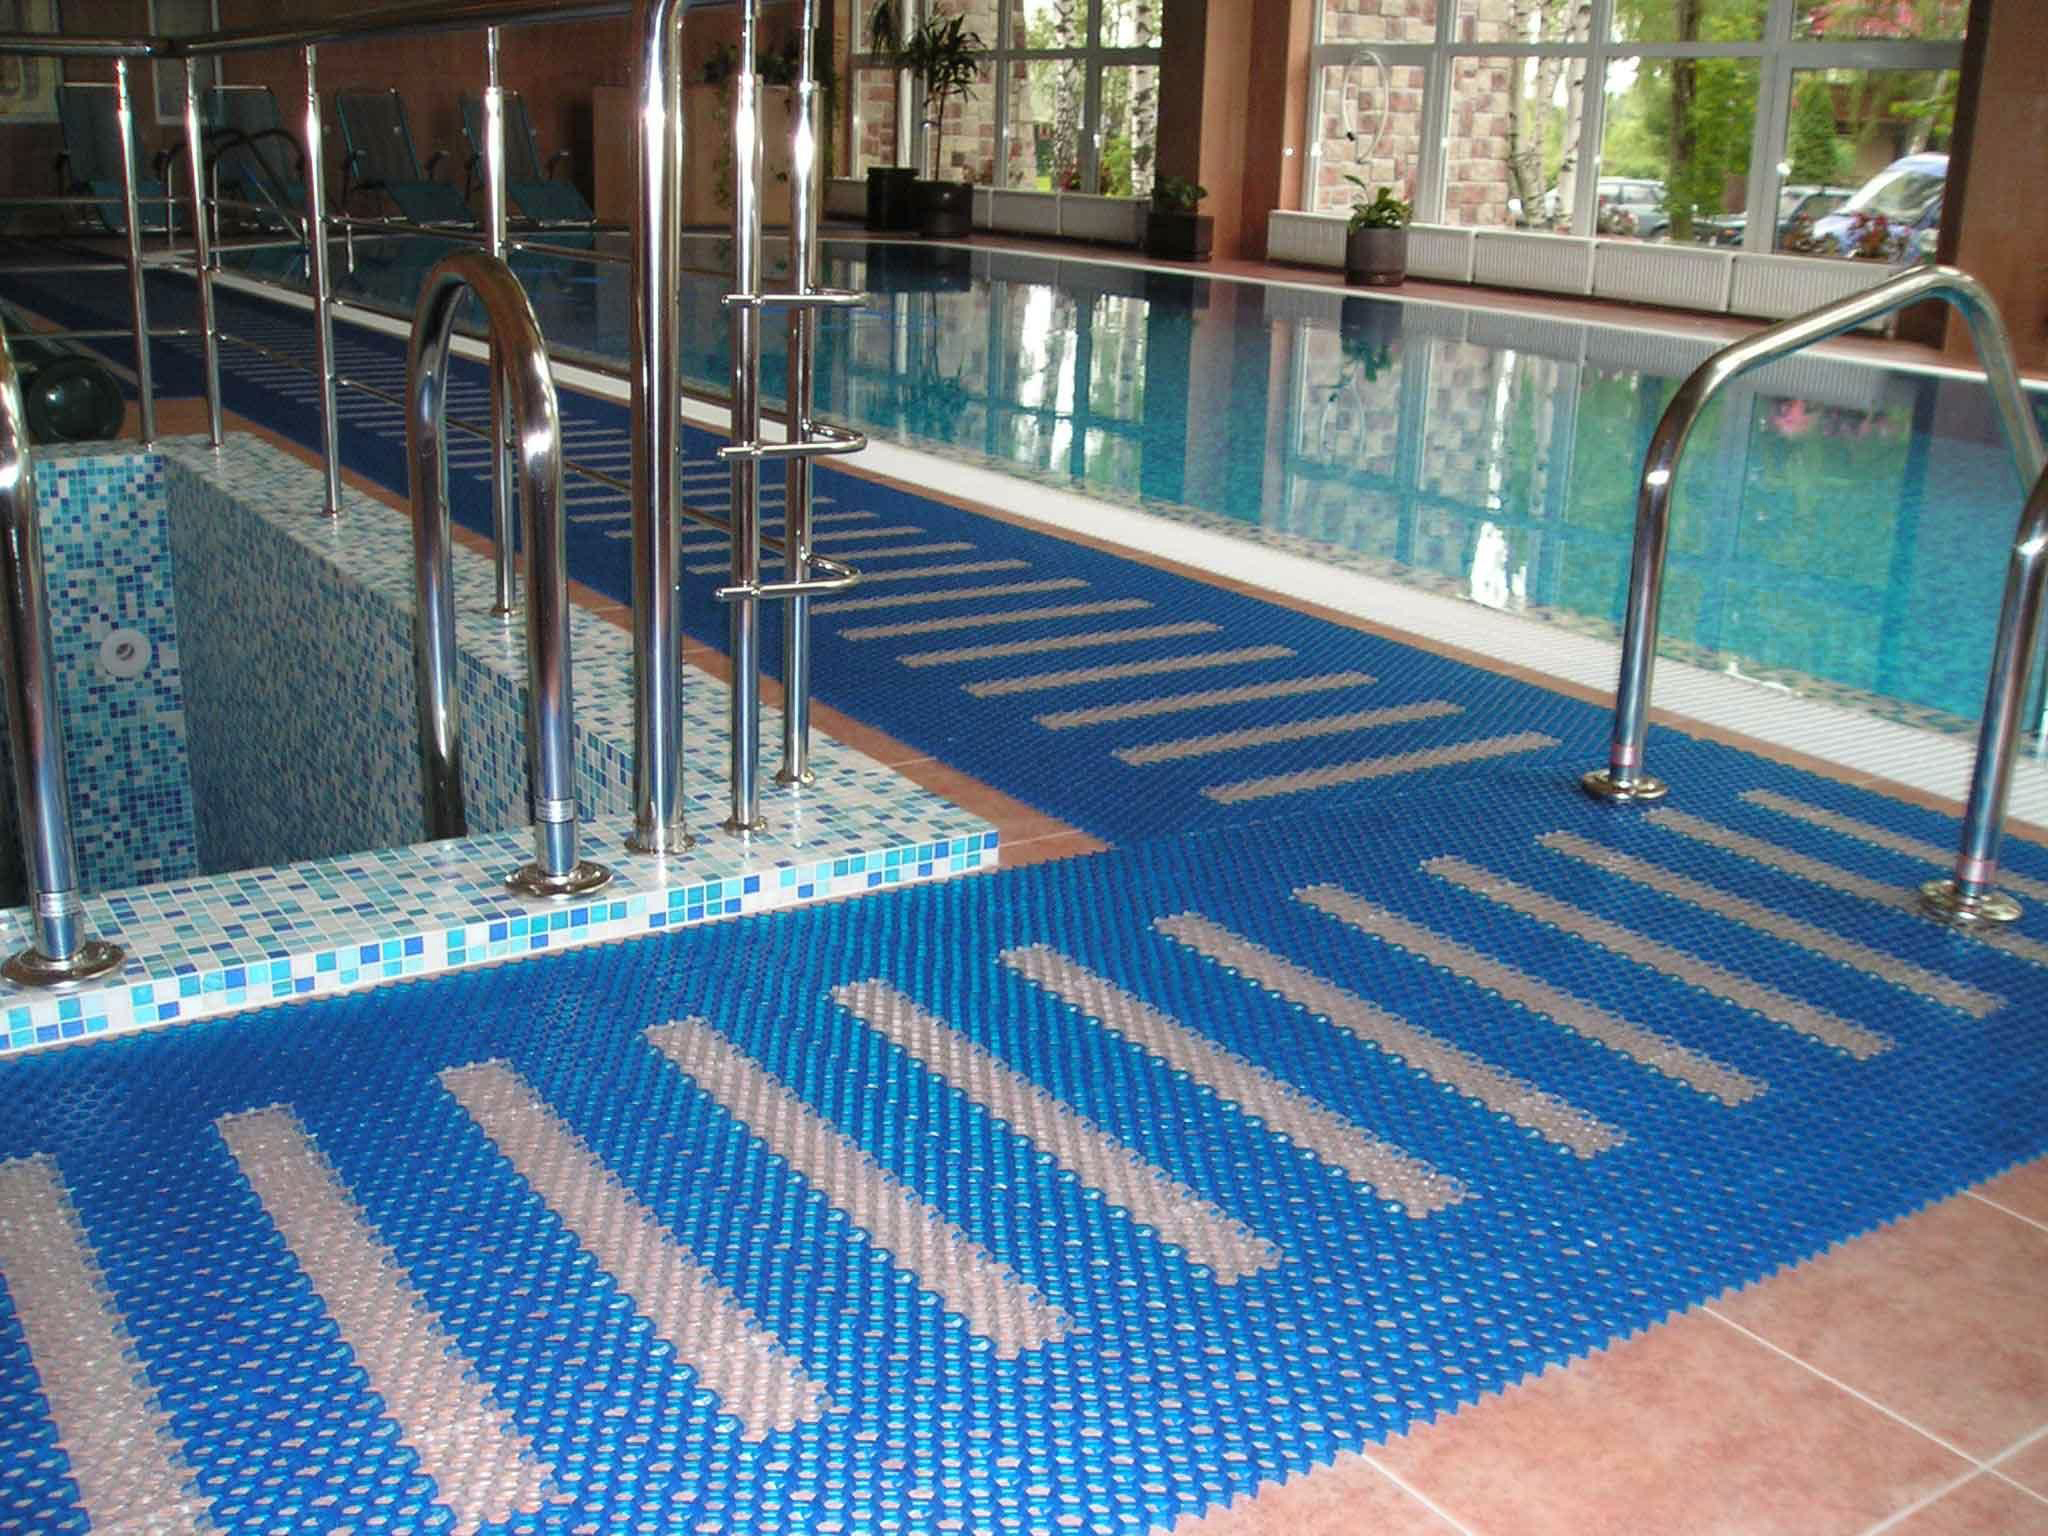 Ranking the best pool flooring for 2022